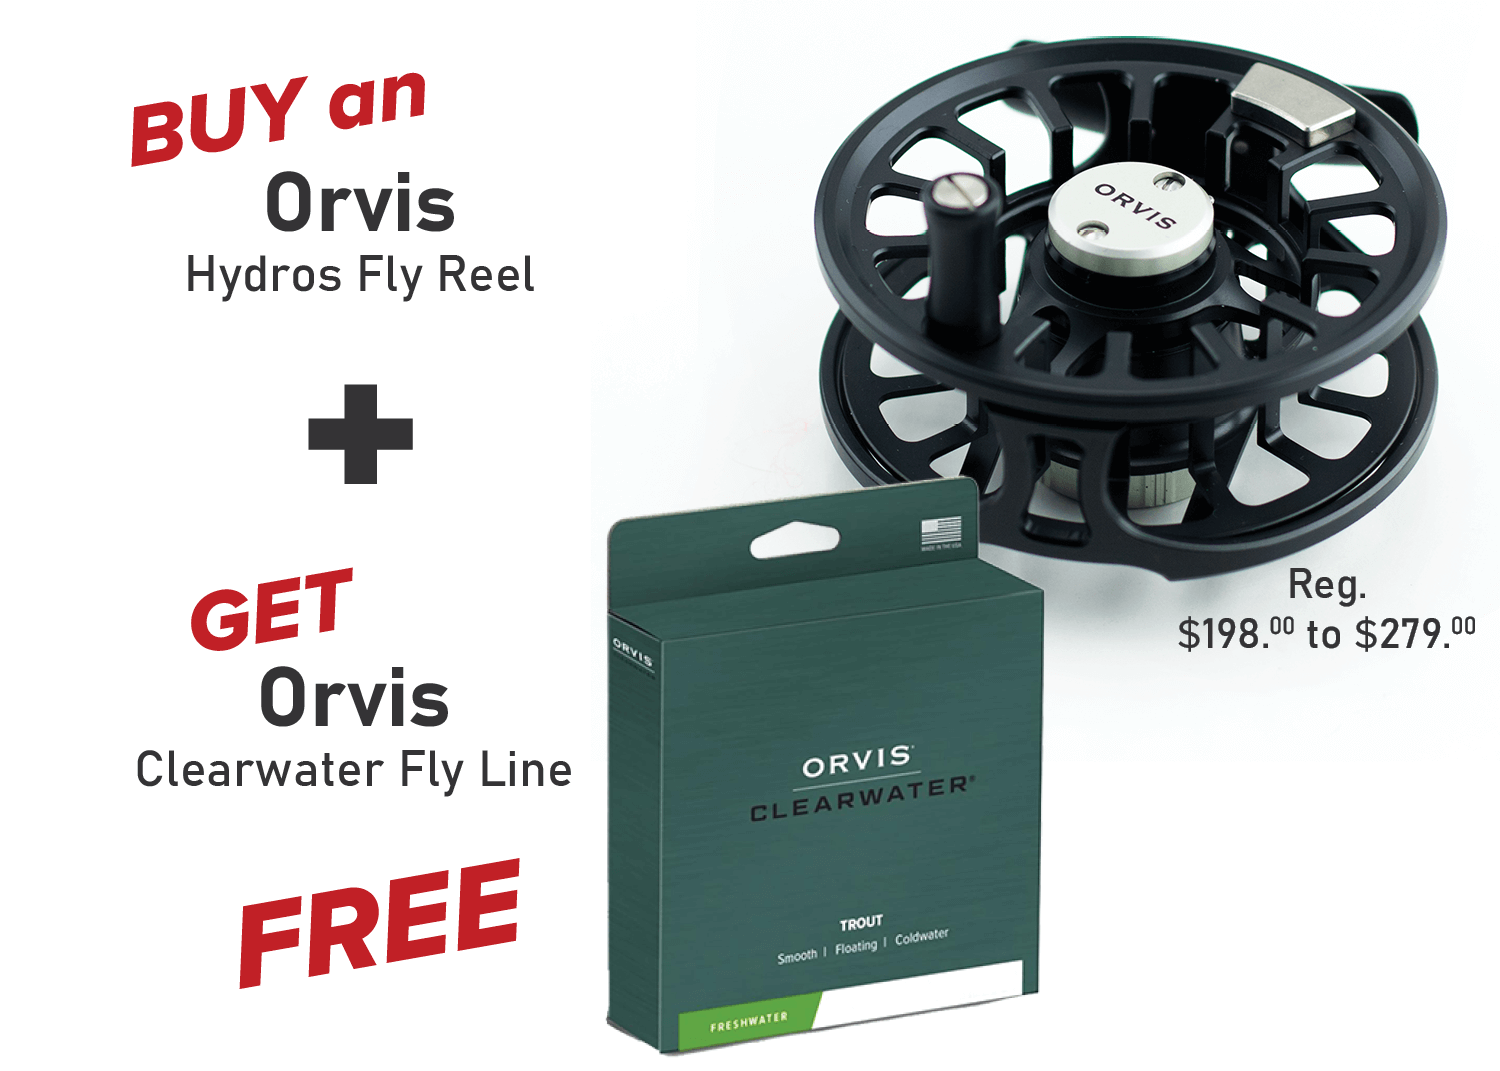 Buy an Orvis Hydros Fly Reel & Get a FREE 